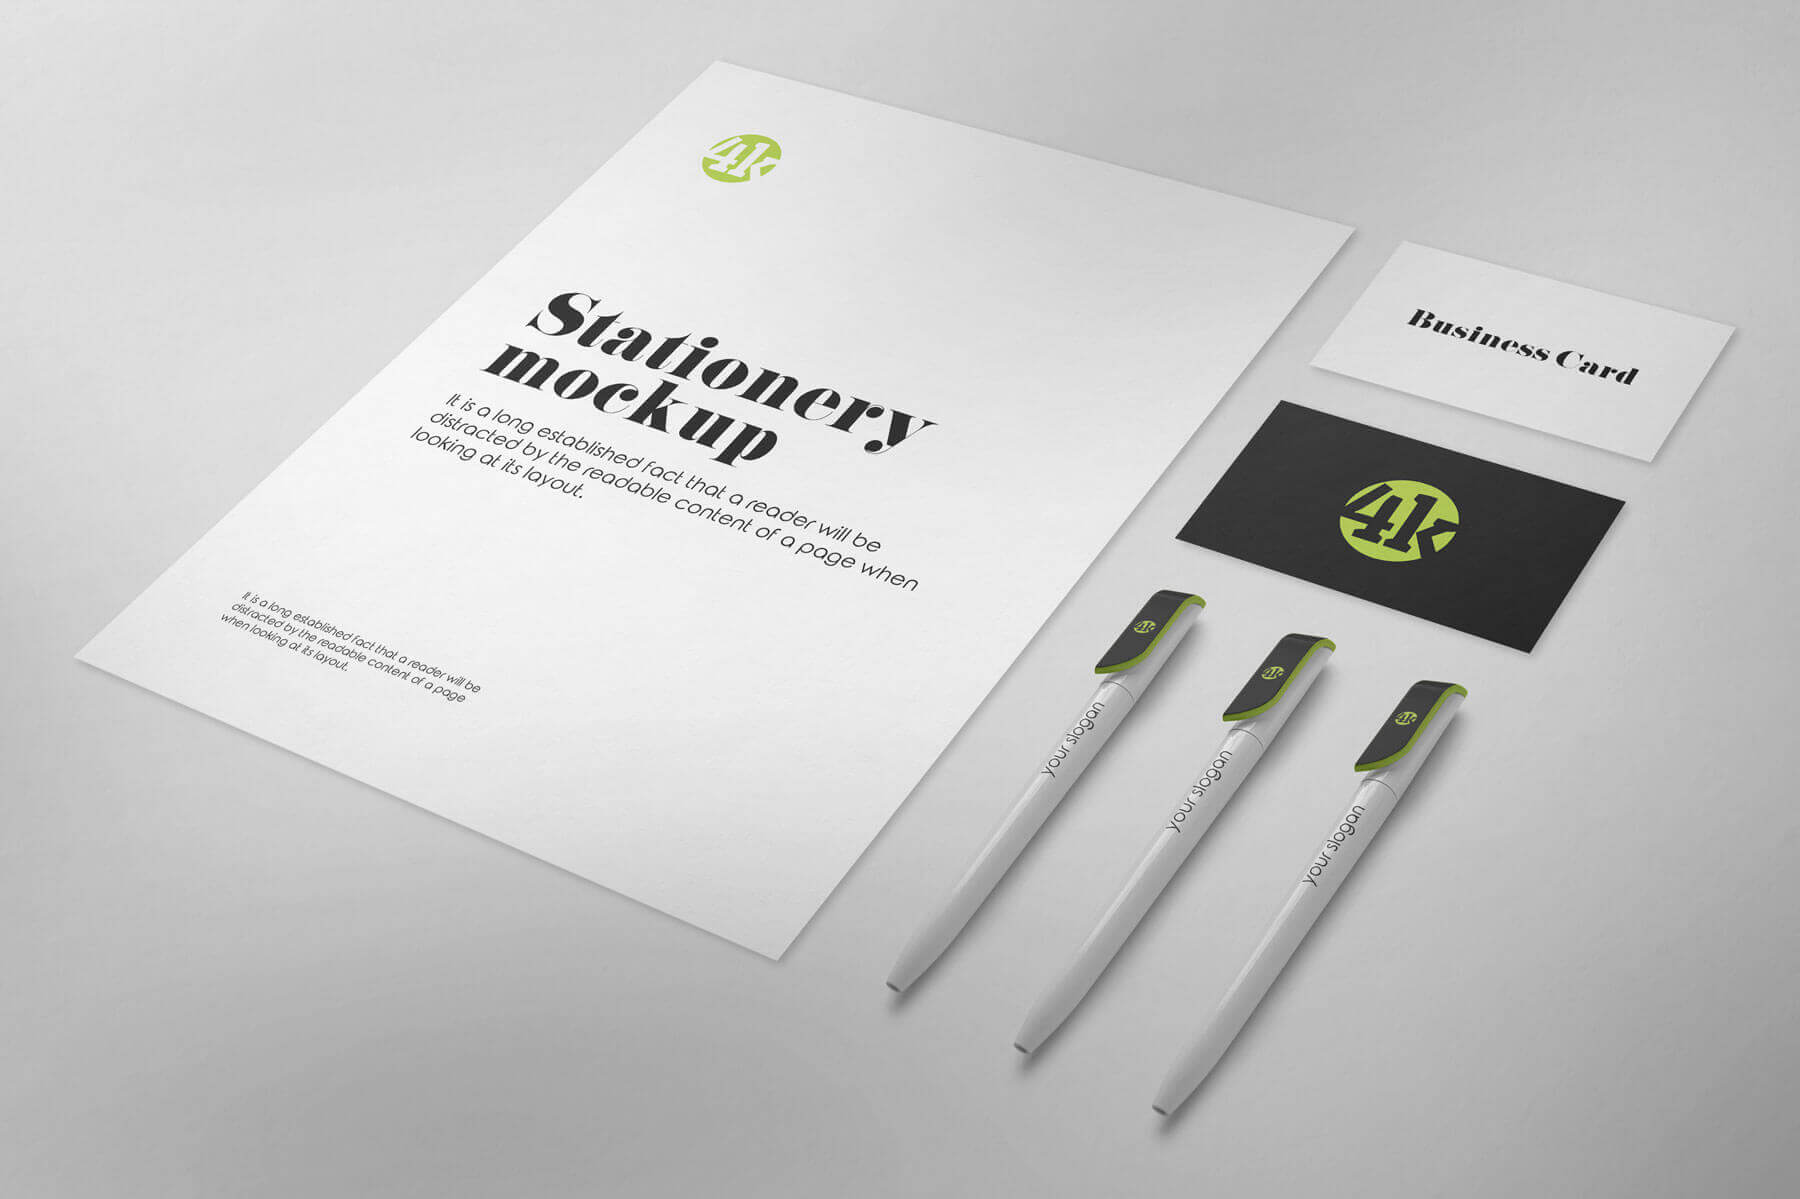  2 Stationery Mockups Including Pens, Business Cards, and Letterhead 